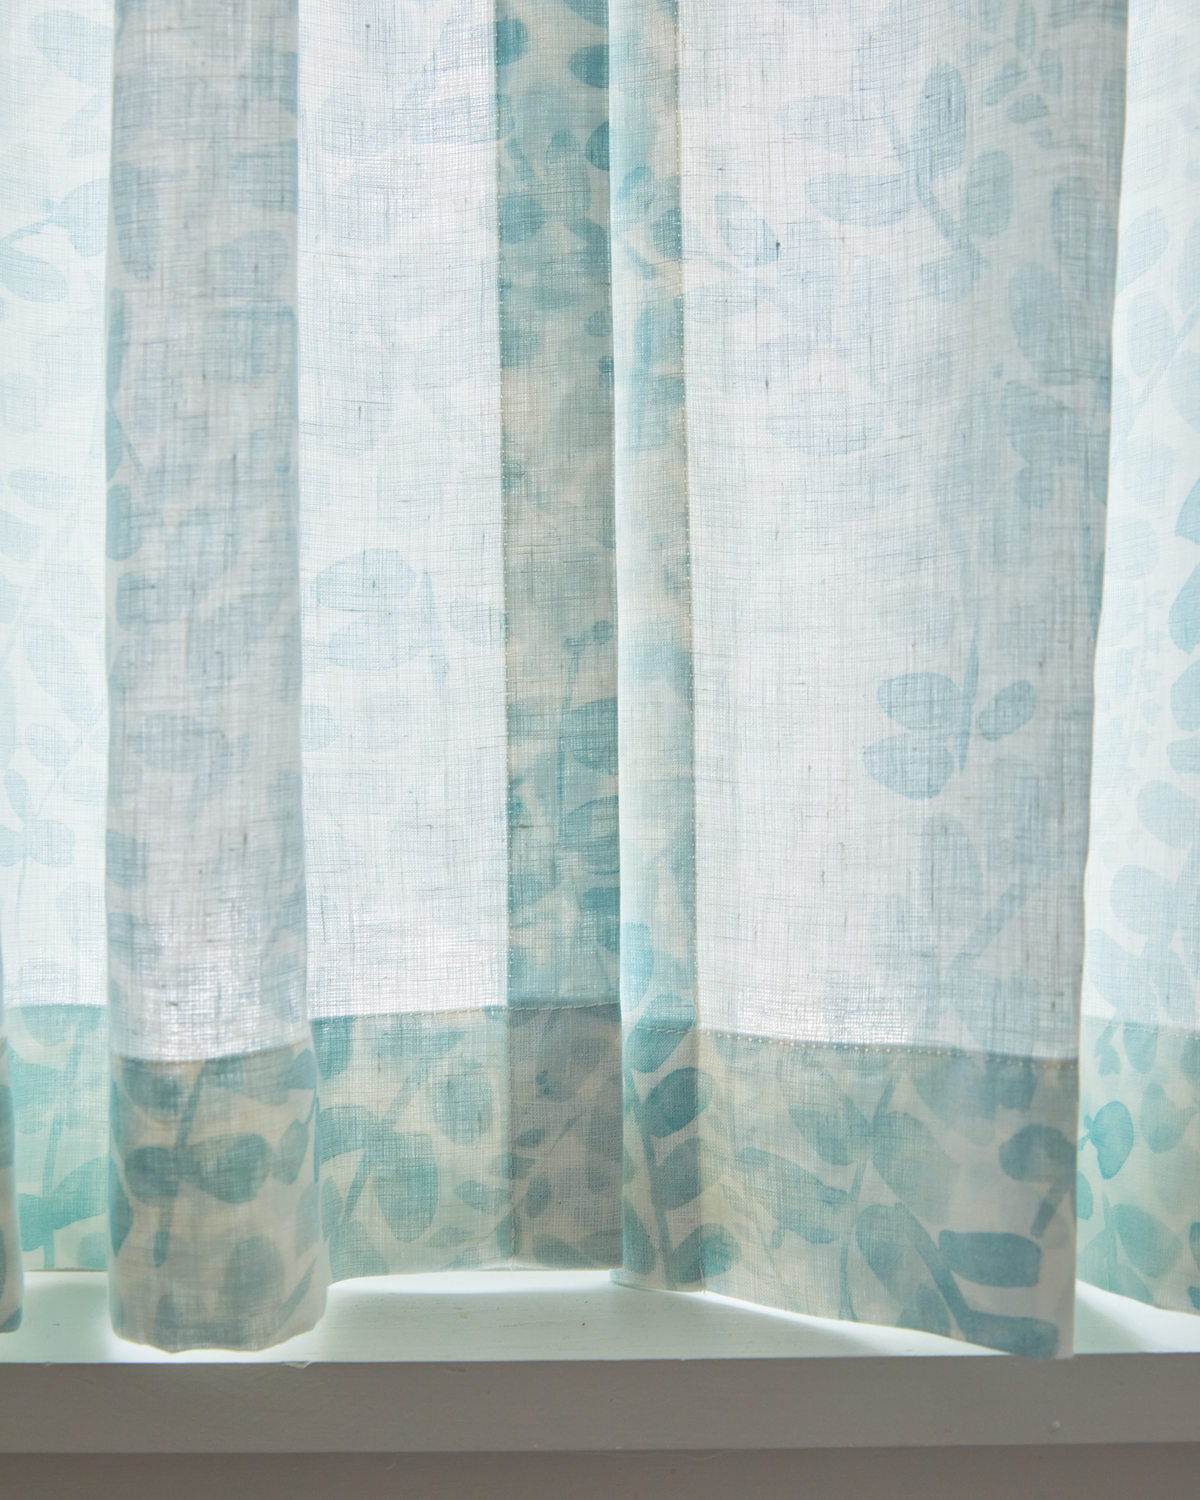 Leafy Vines Fabric in Light Blue